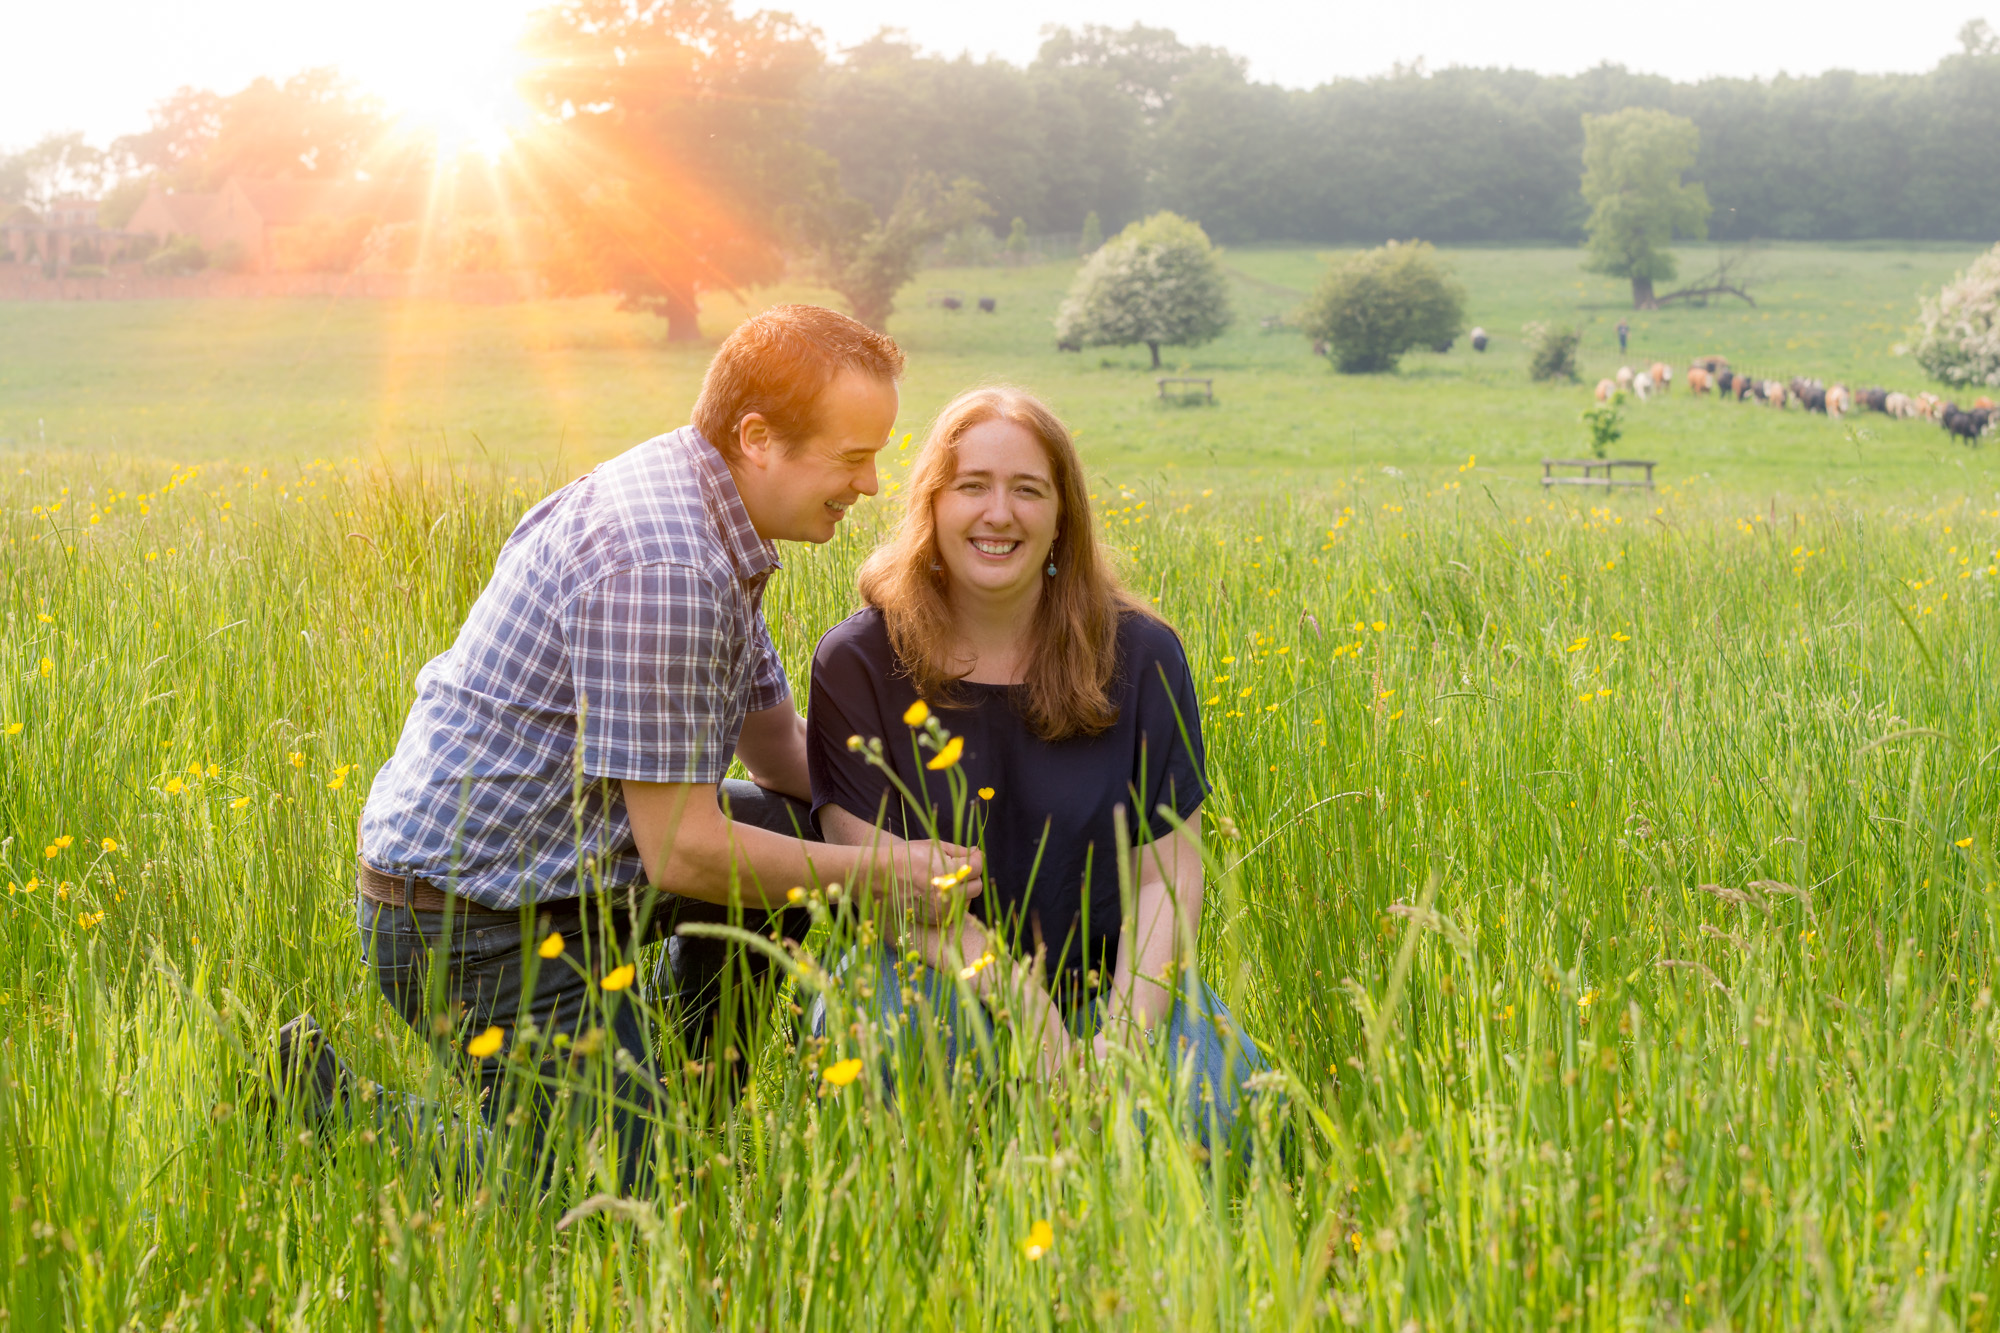 Couple photograph in field with sun